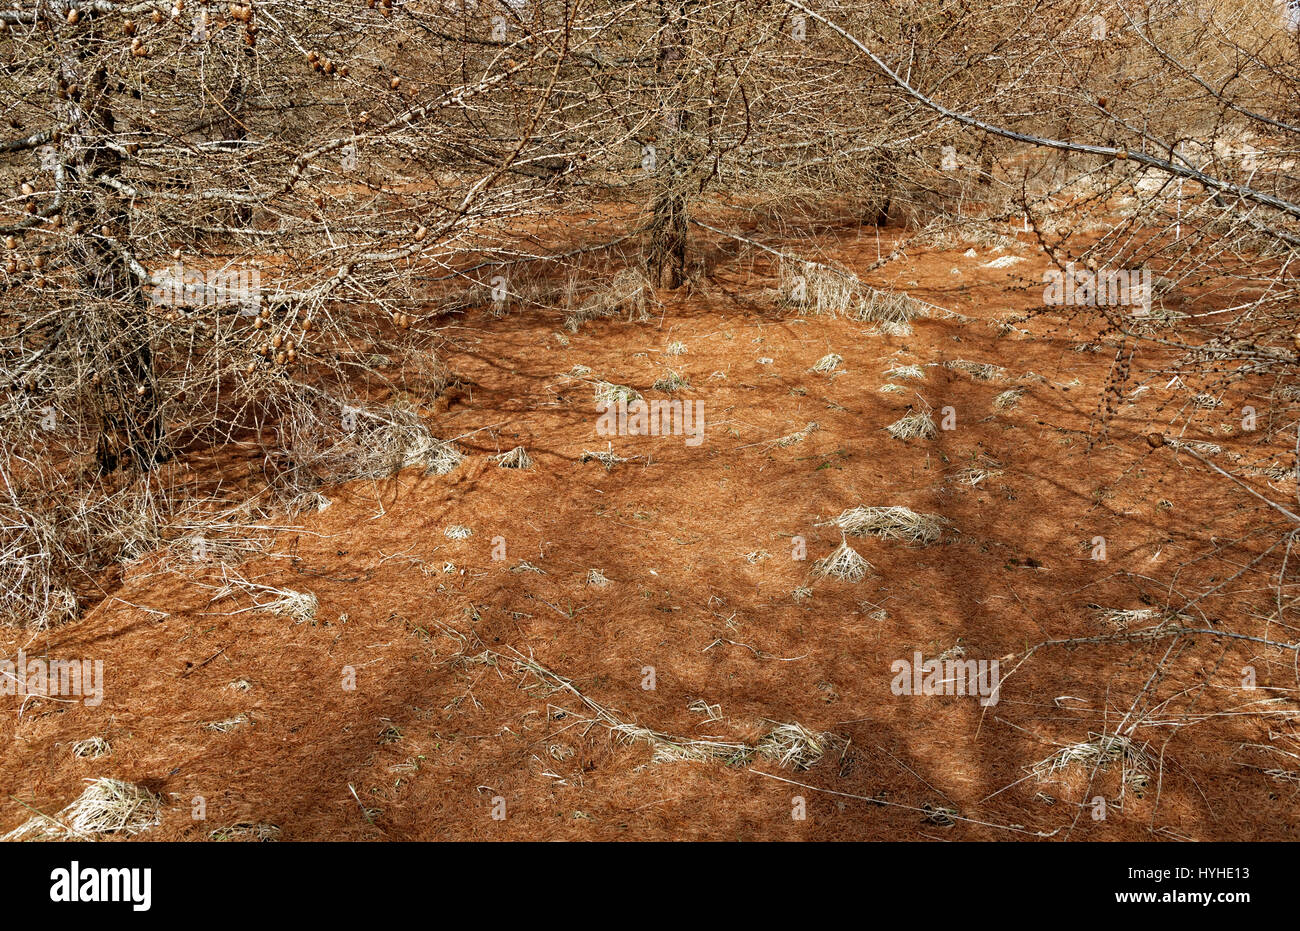 Larch needle landscape under larch forest in early spring Stock Photo